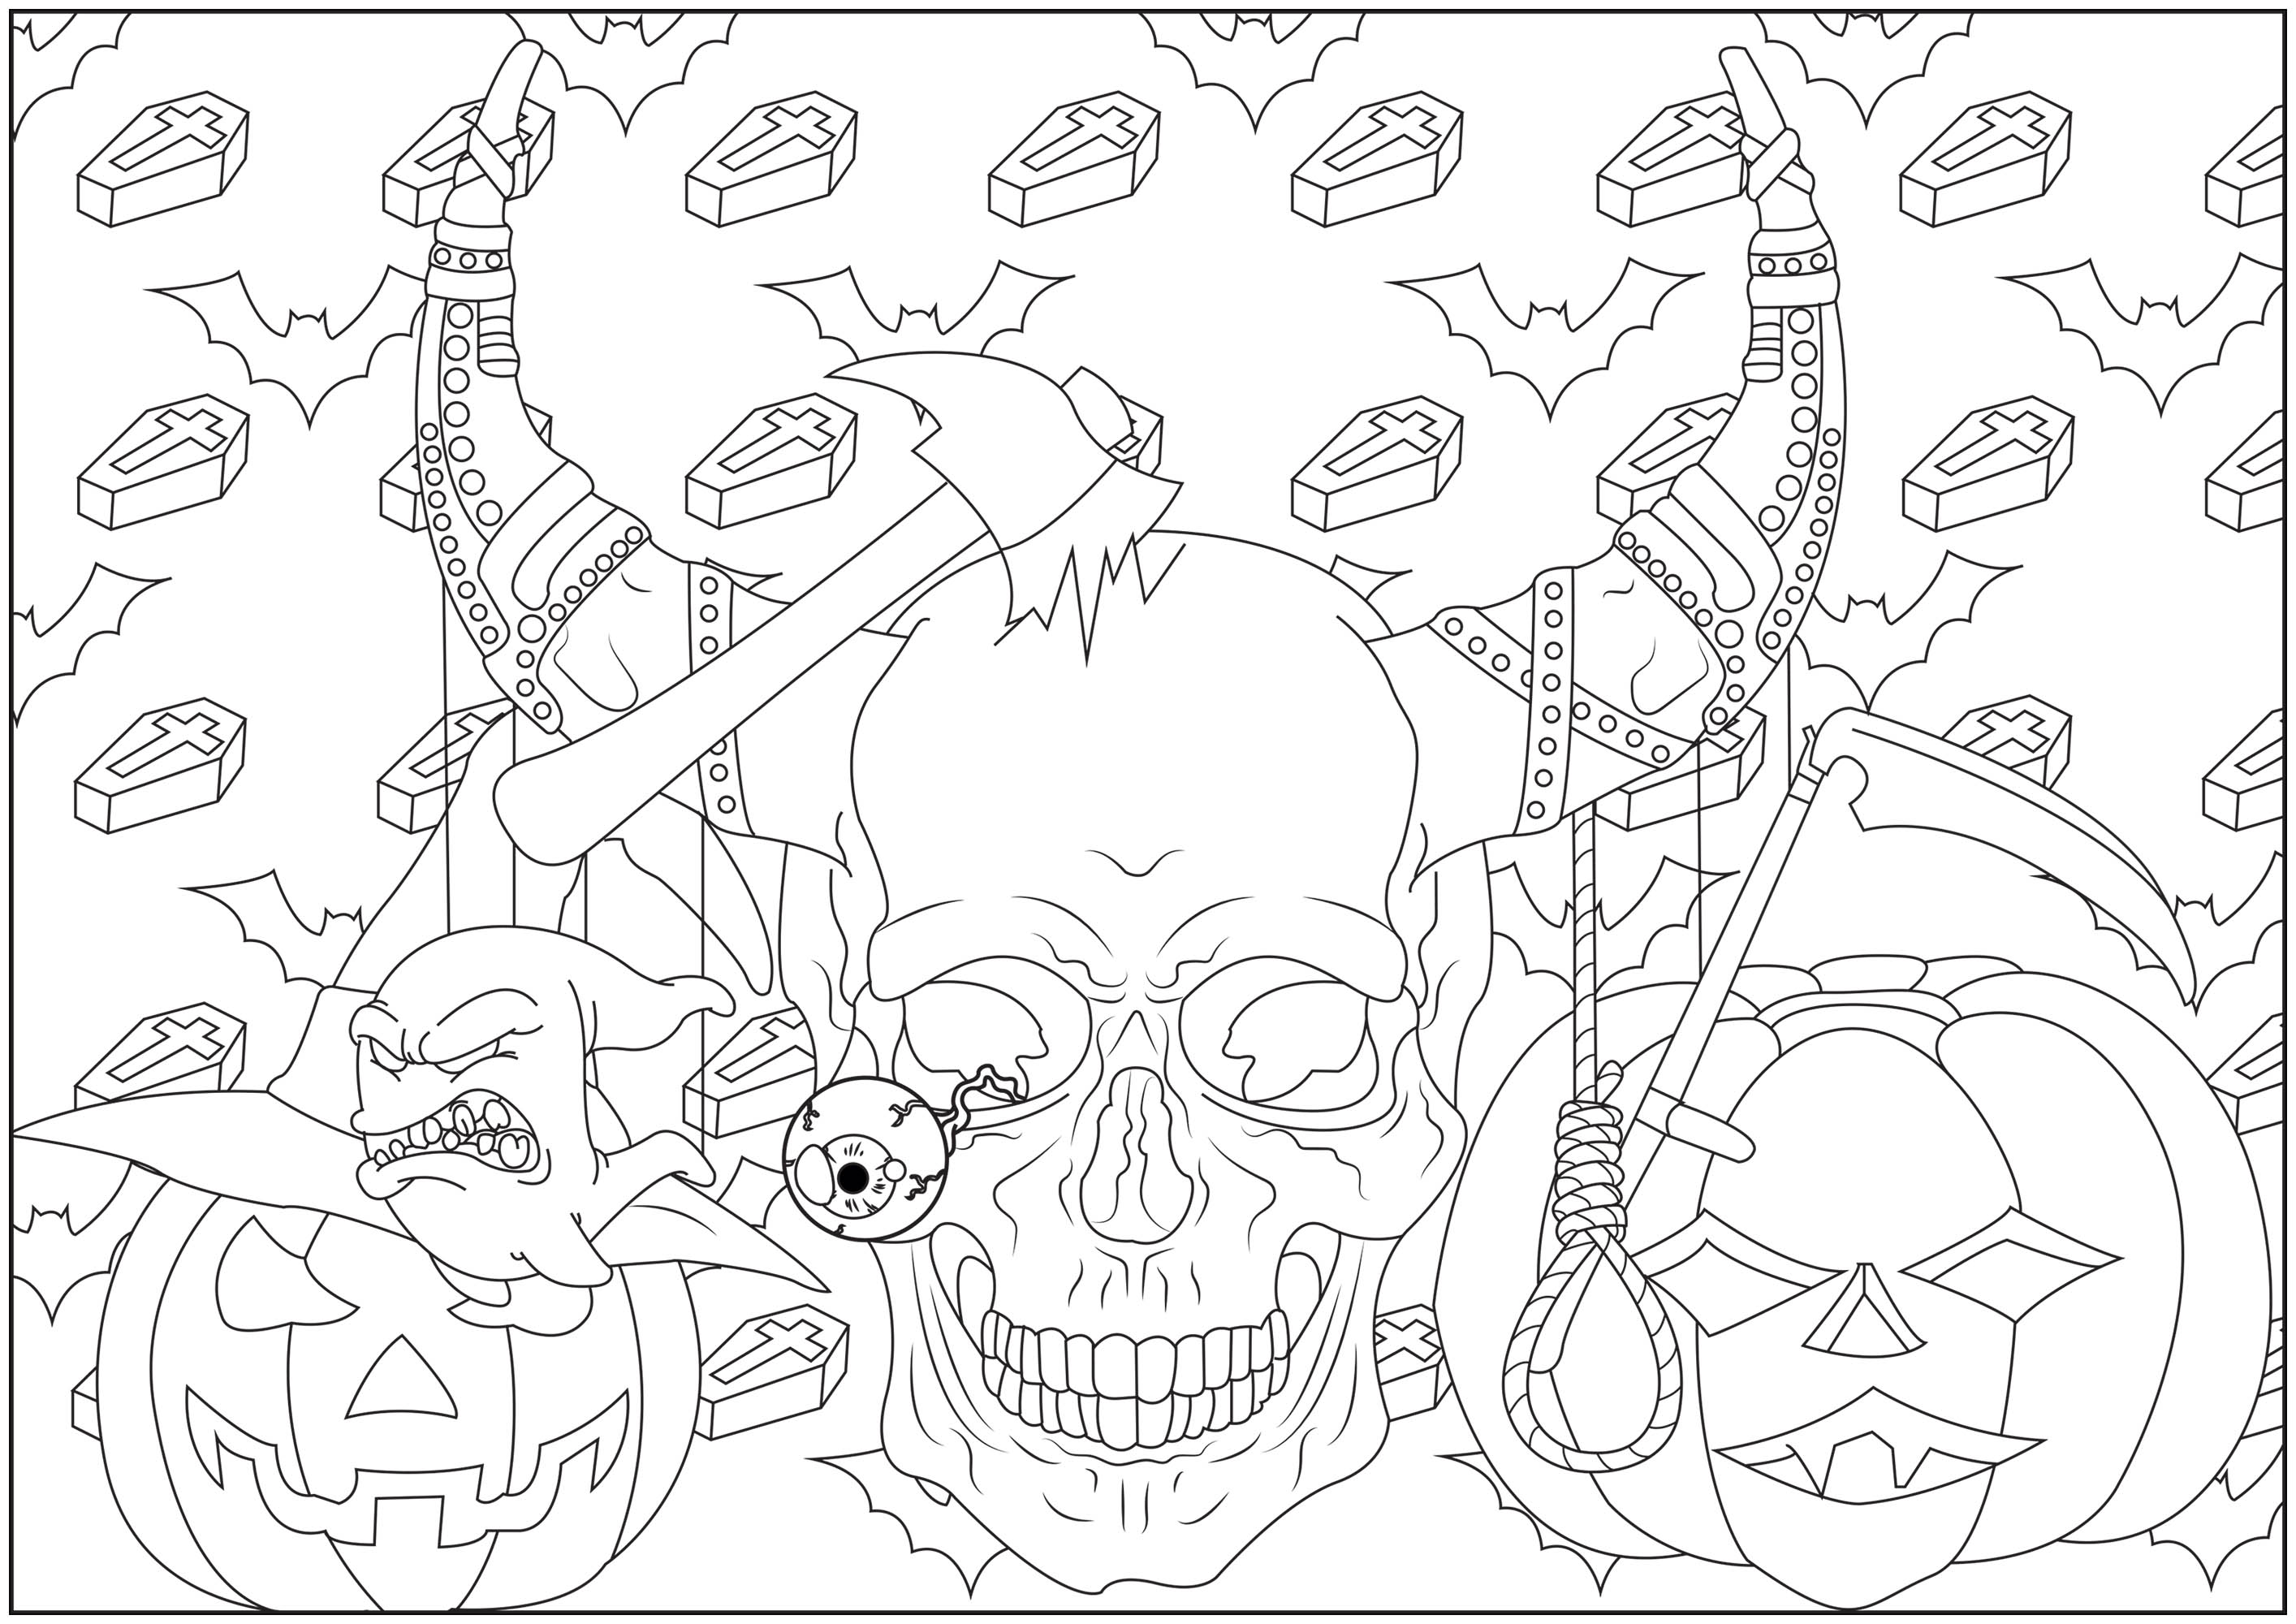 Color this scary skull, surrounded by pumpkins, with in background : coffins and bats